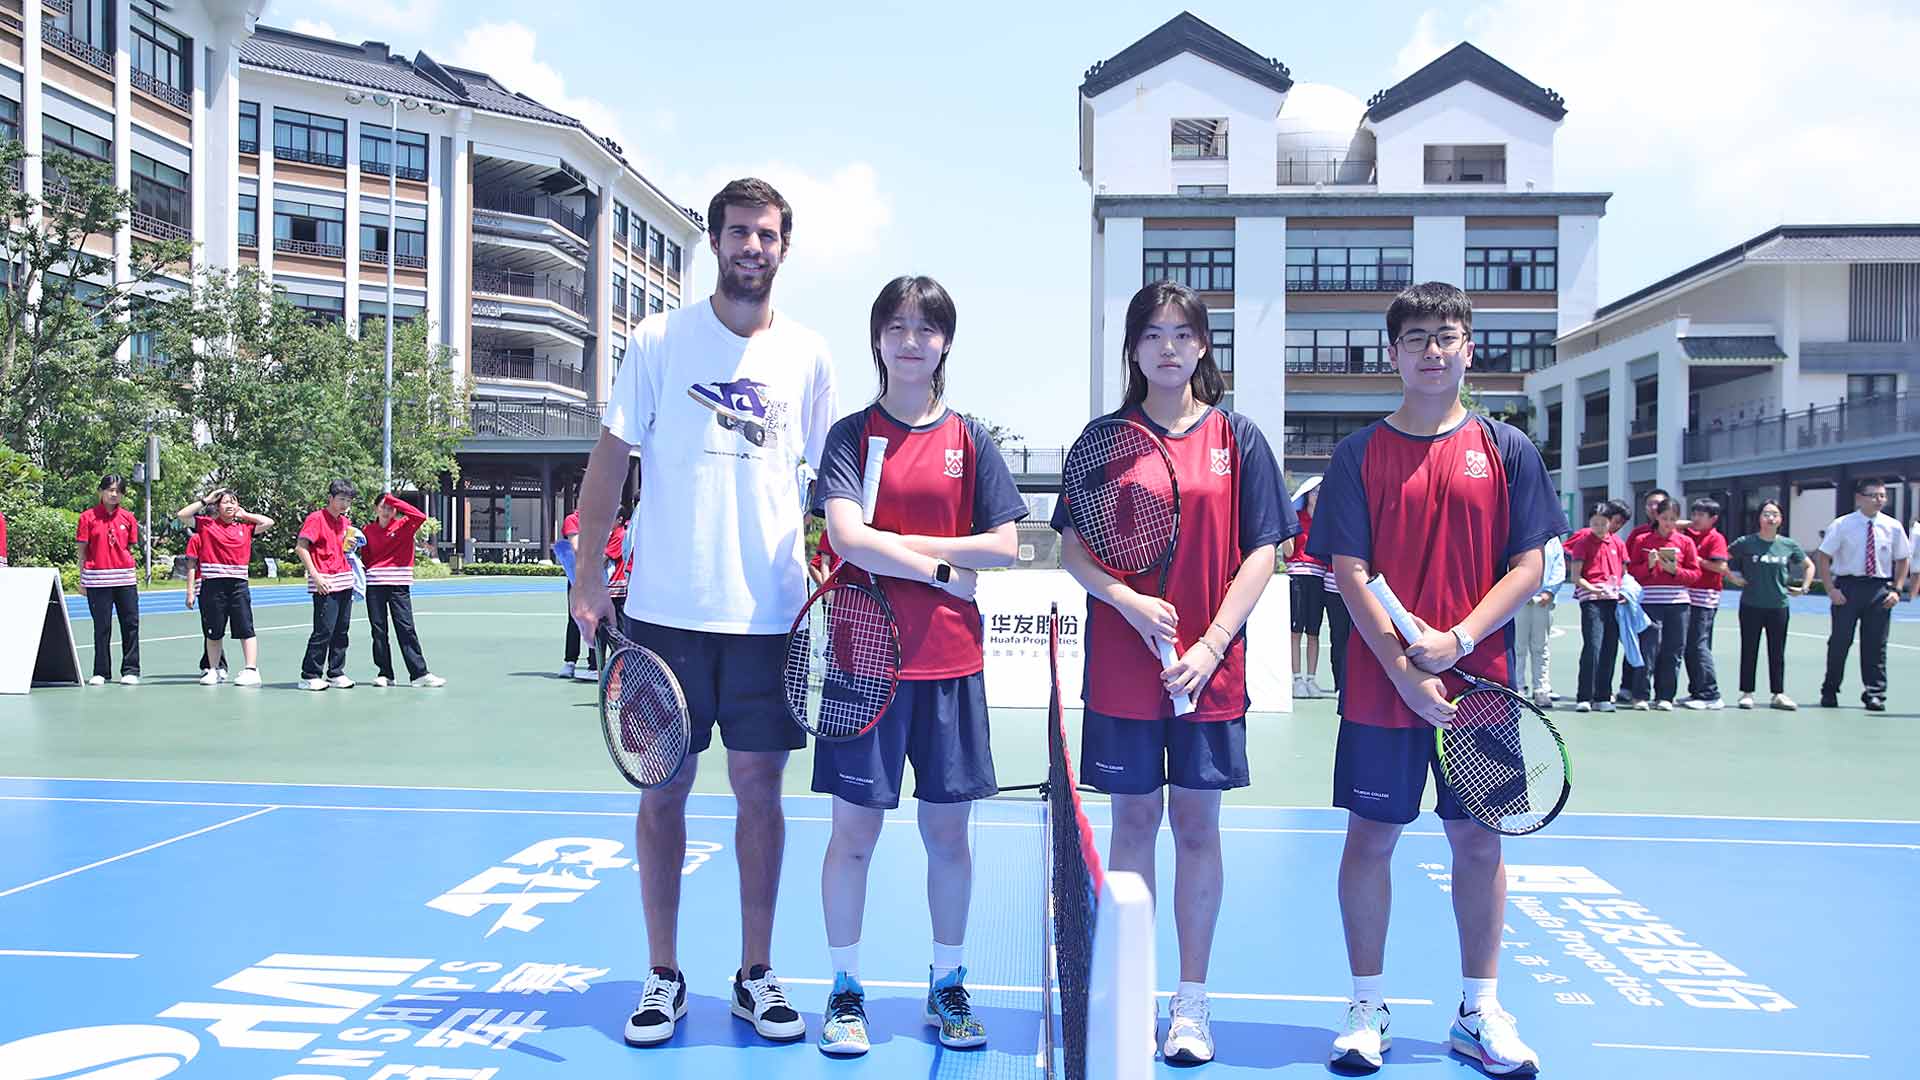 Karen Khachanov visits a local school on Thursday ahead of his appearance as top seed at the Huafa Properties Zhuhai Championships.